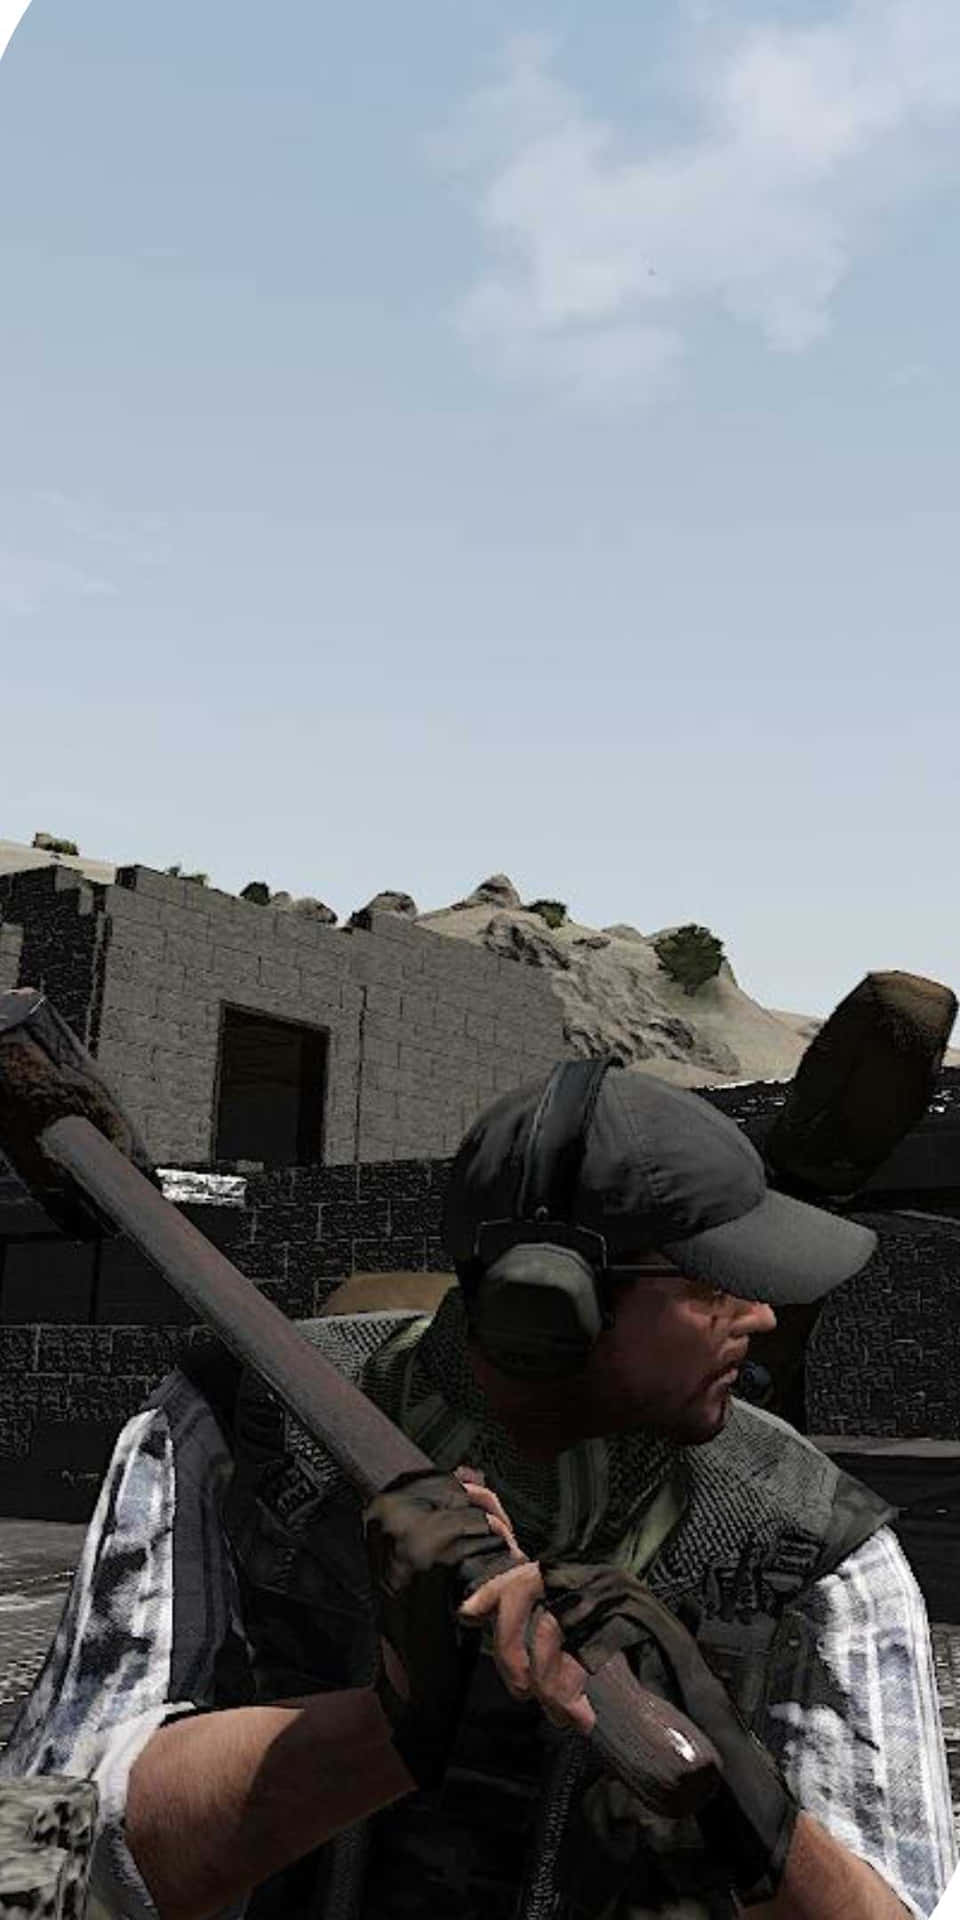 Immersive Mods for Arma 3